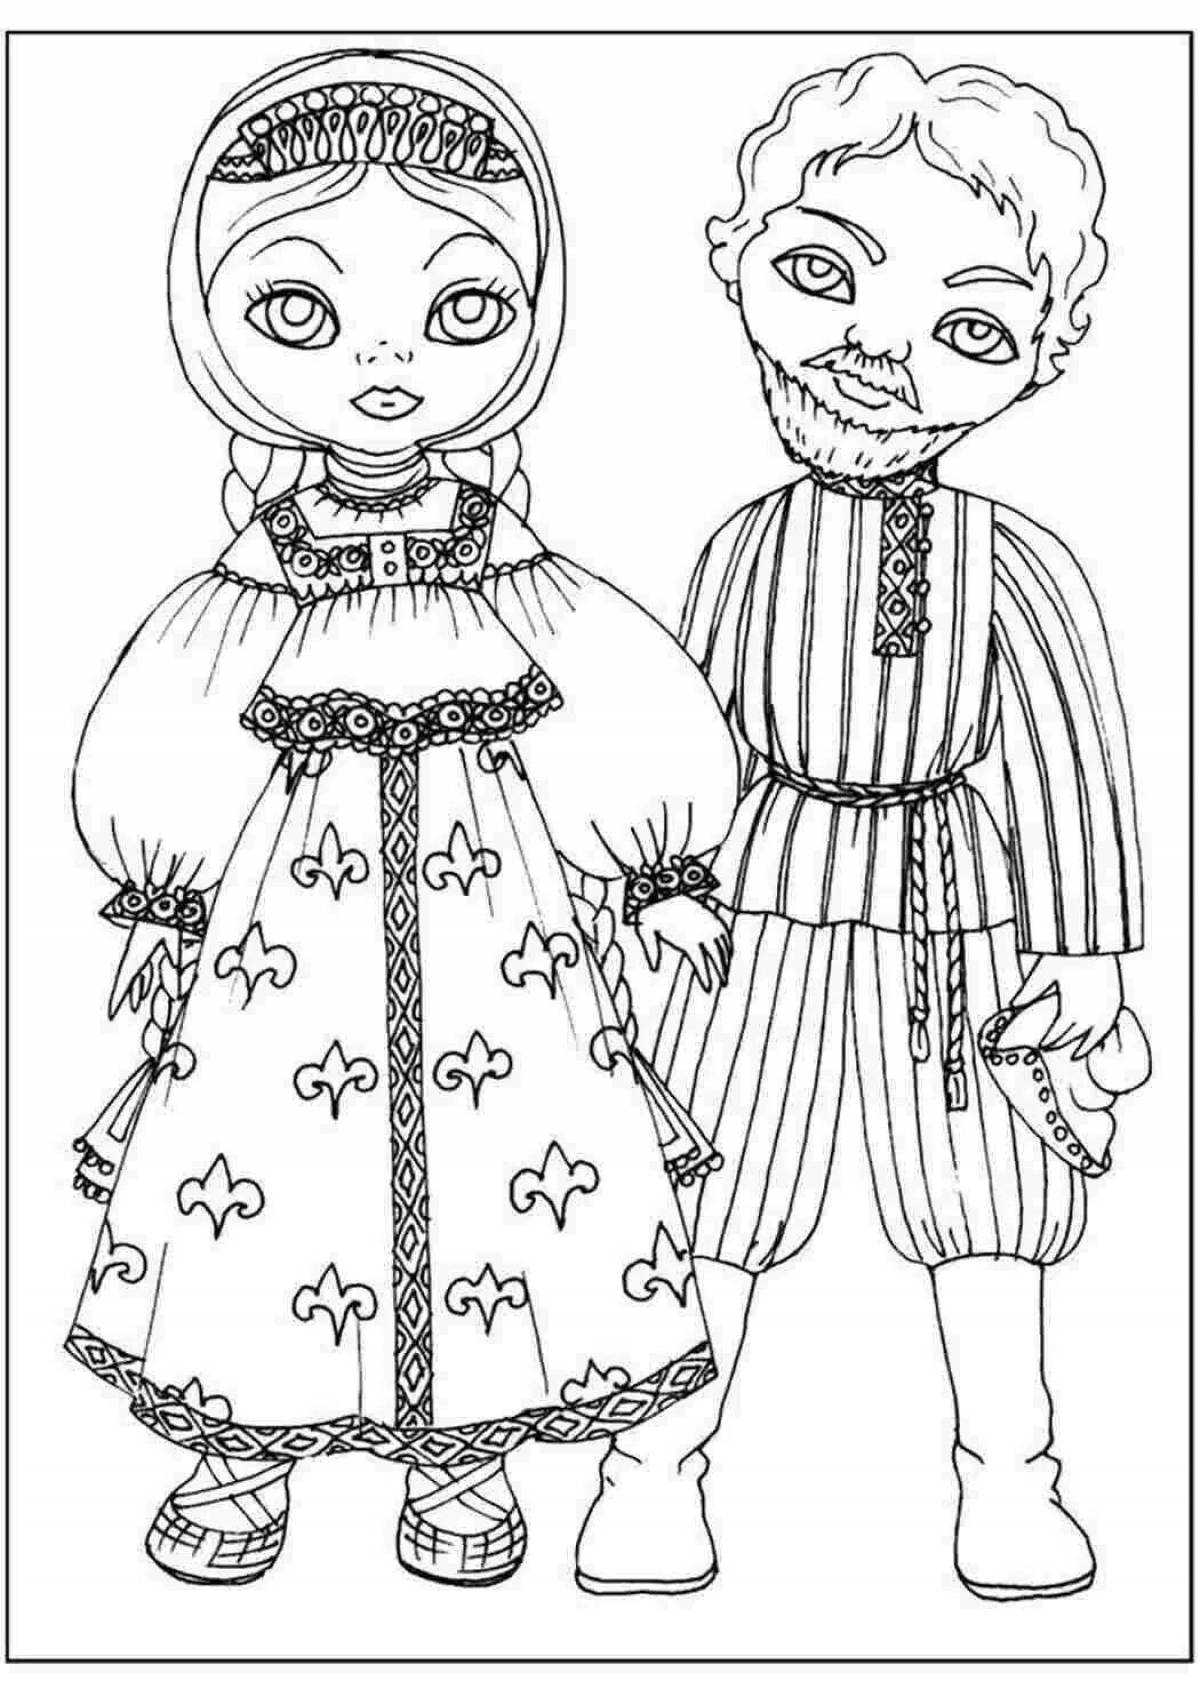 Colorful belarusian doll coloring